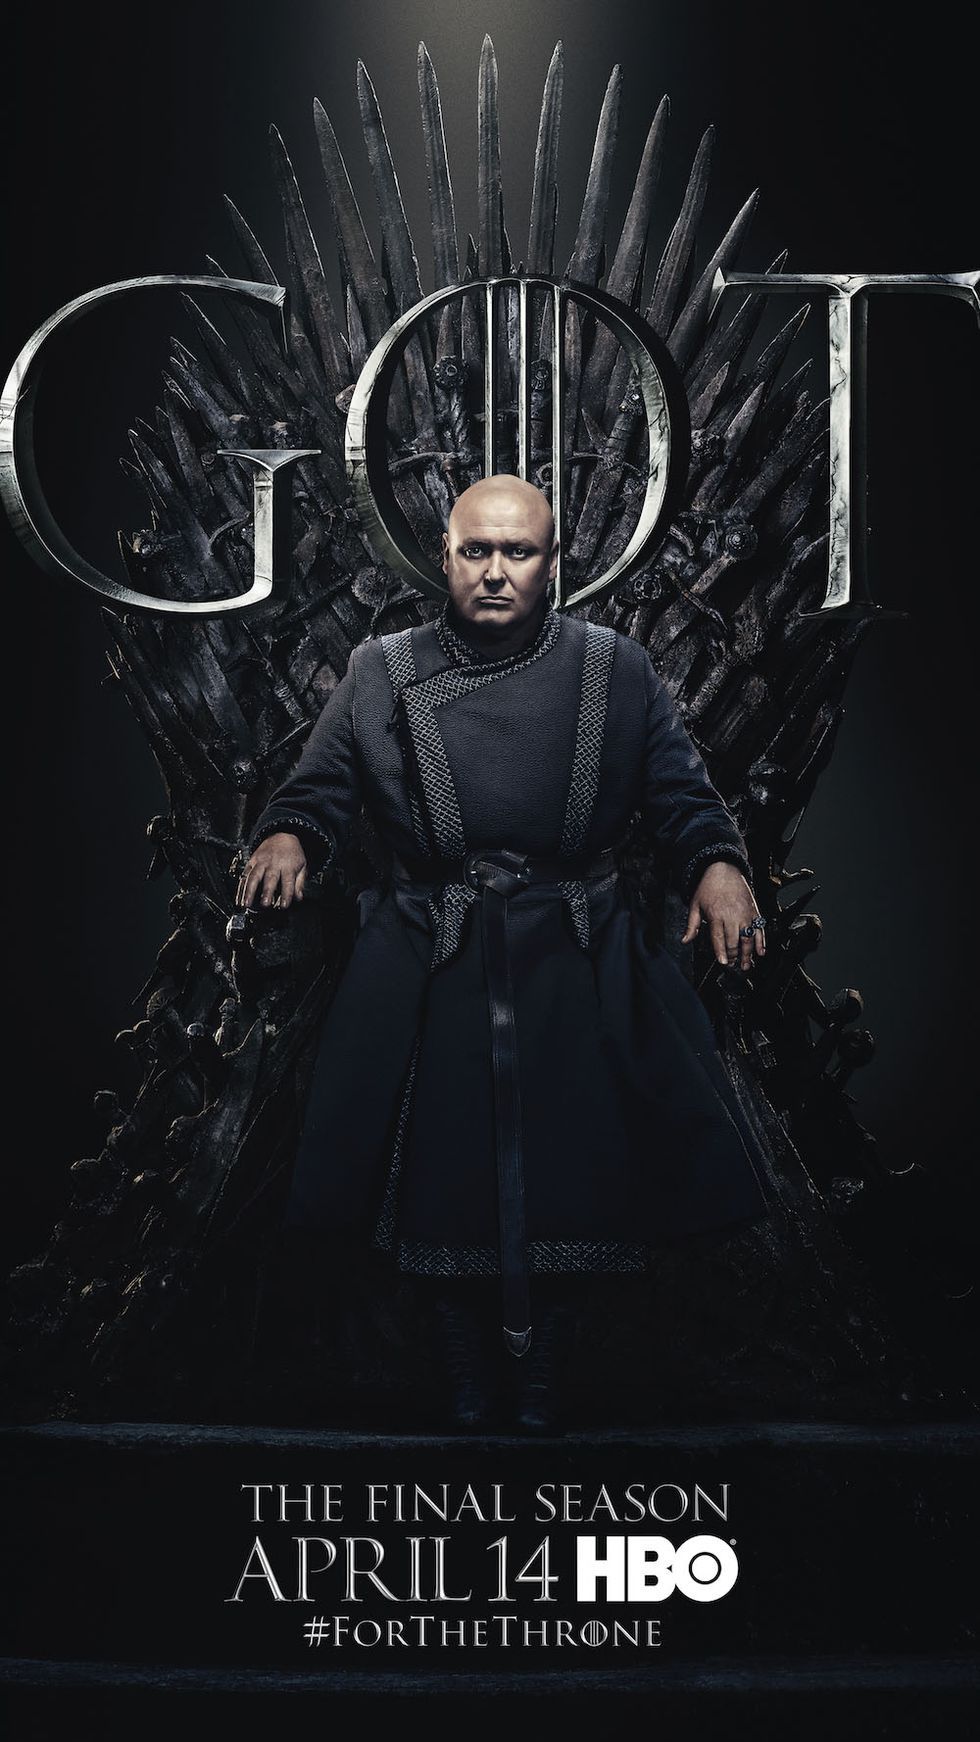 The Final Season 11 x 17 inches Game Of Thrones poster 